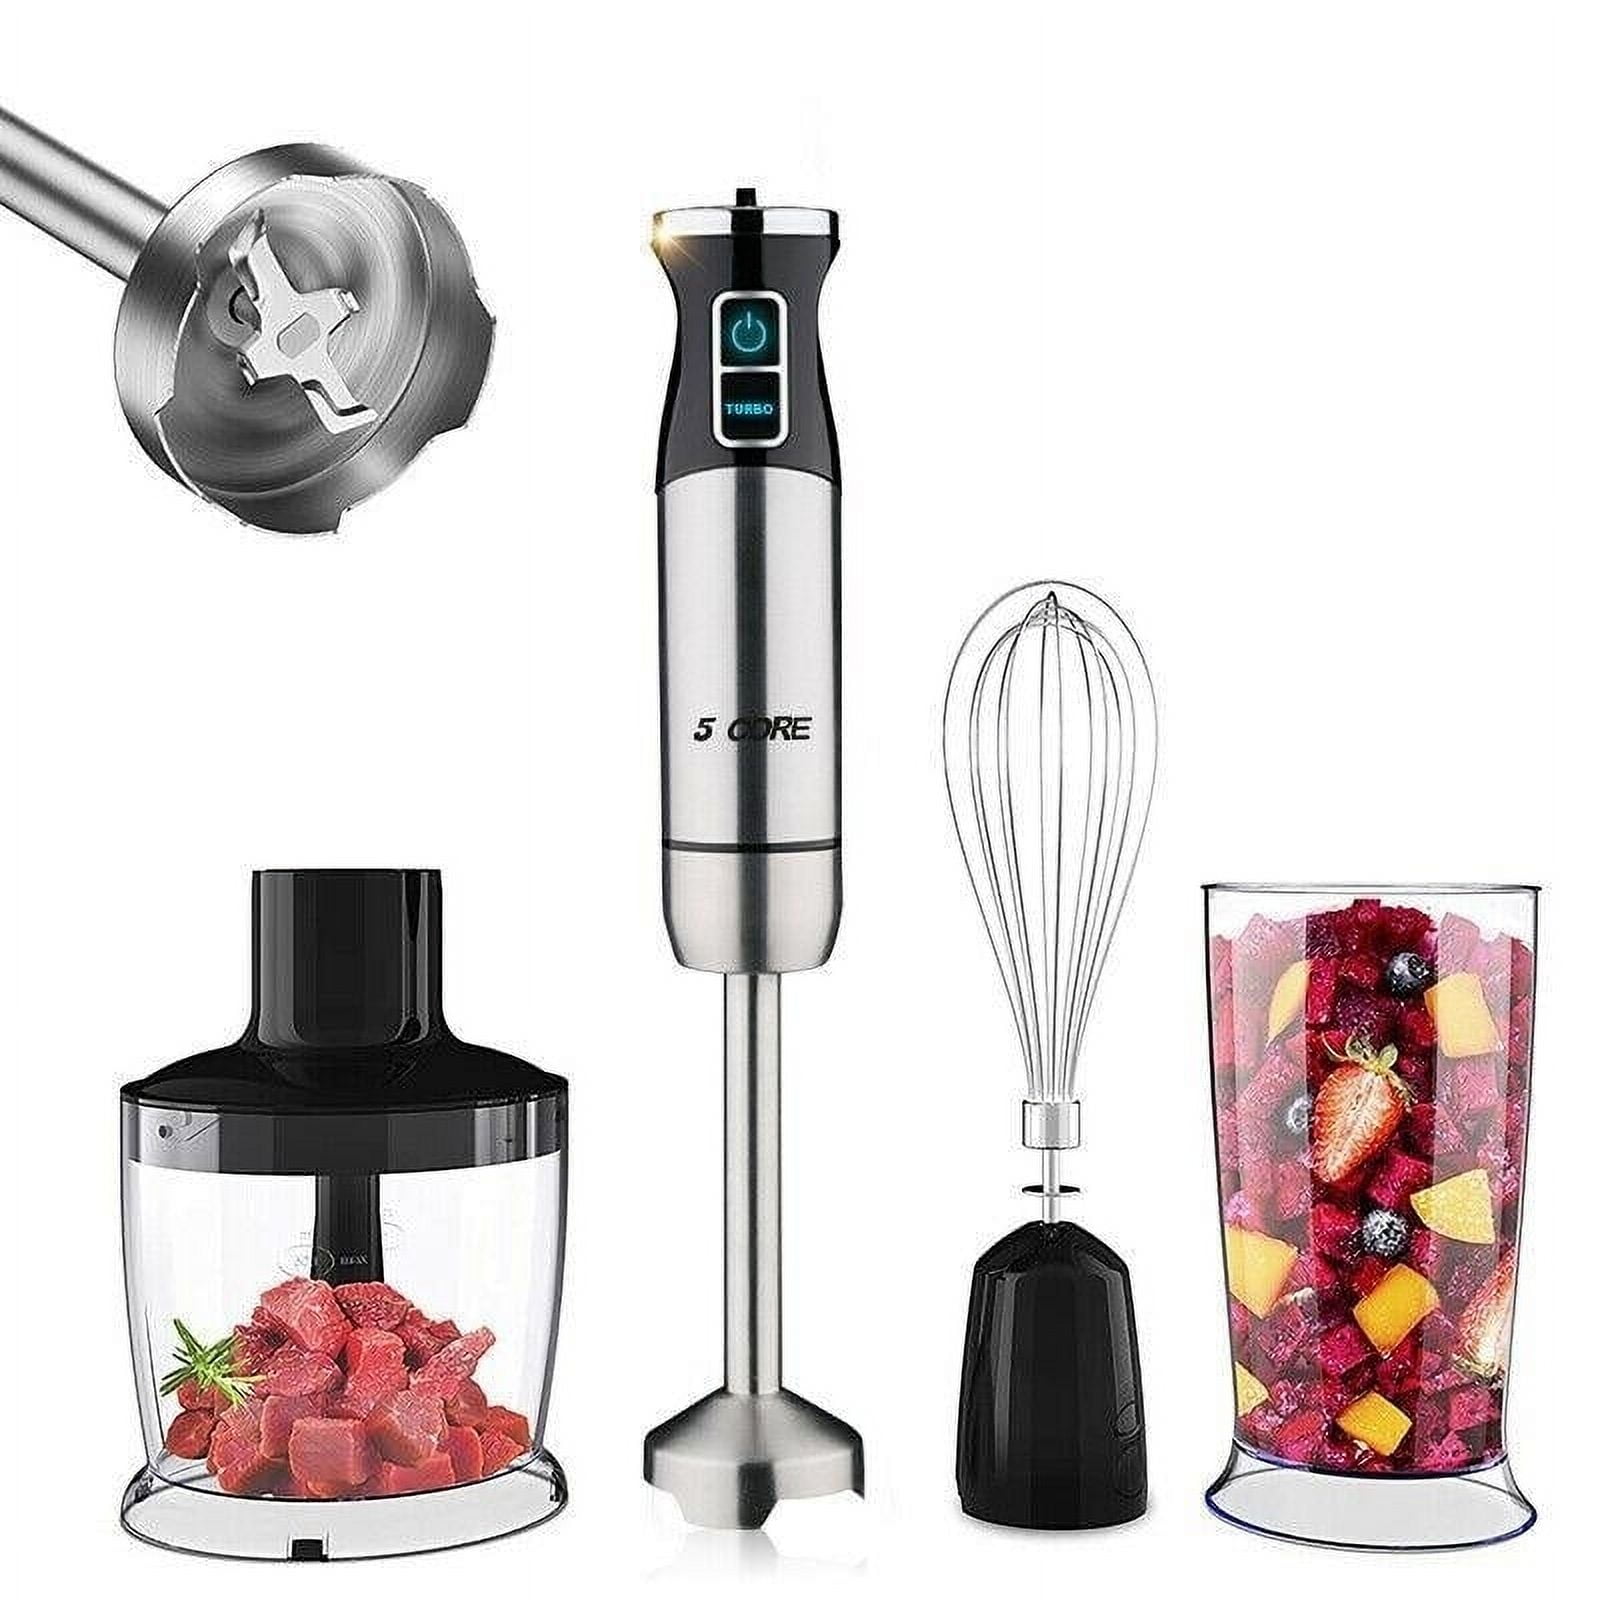 5 Core Immersion Hand Blender 500W Multifunctional Powerful Electric  Handheld Blender 8 Variable speed Emersion Hand Mixer Stick BPA Free HB  1510 